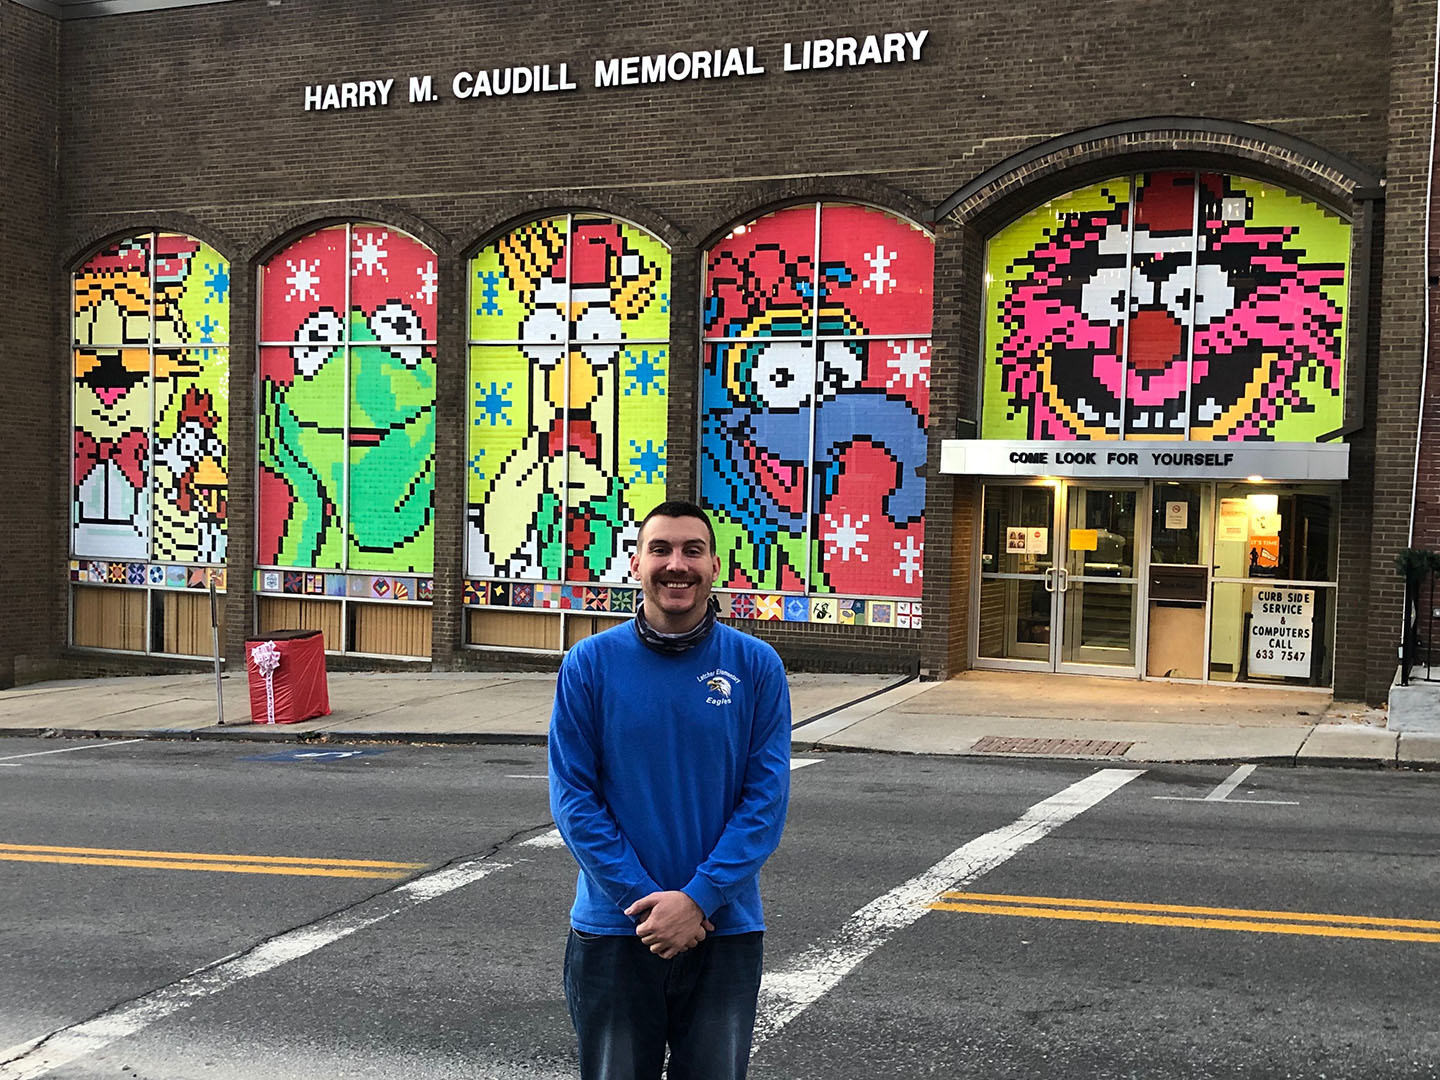 A man stands in front of the windows of a library that are decorated with brightly colored pictures of the Muppets.